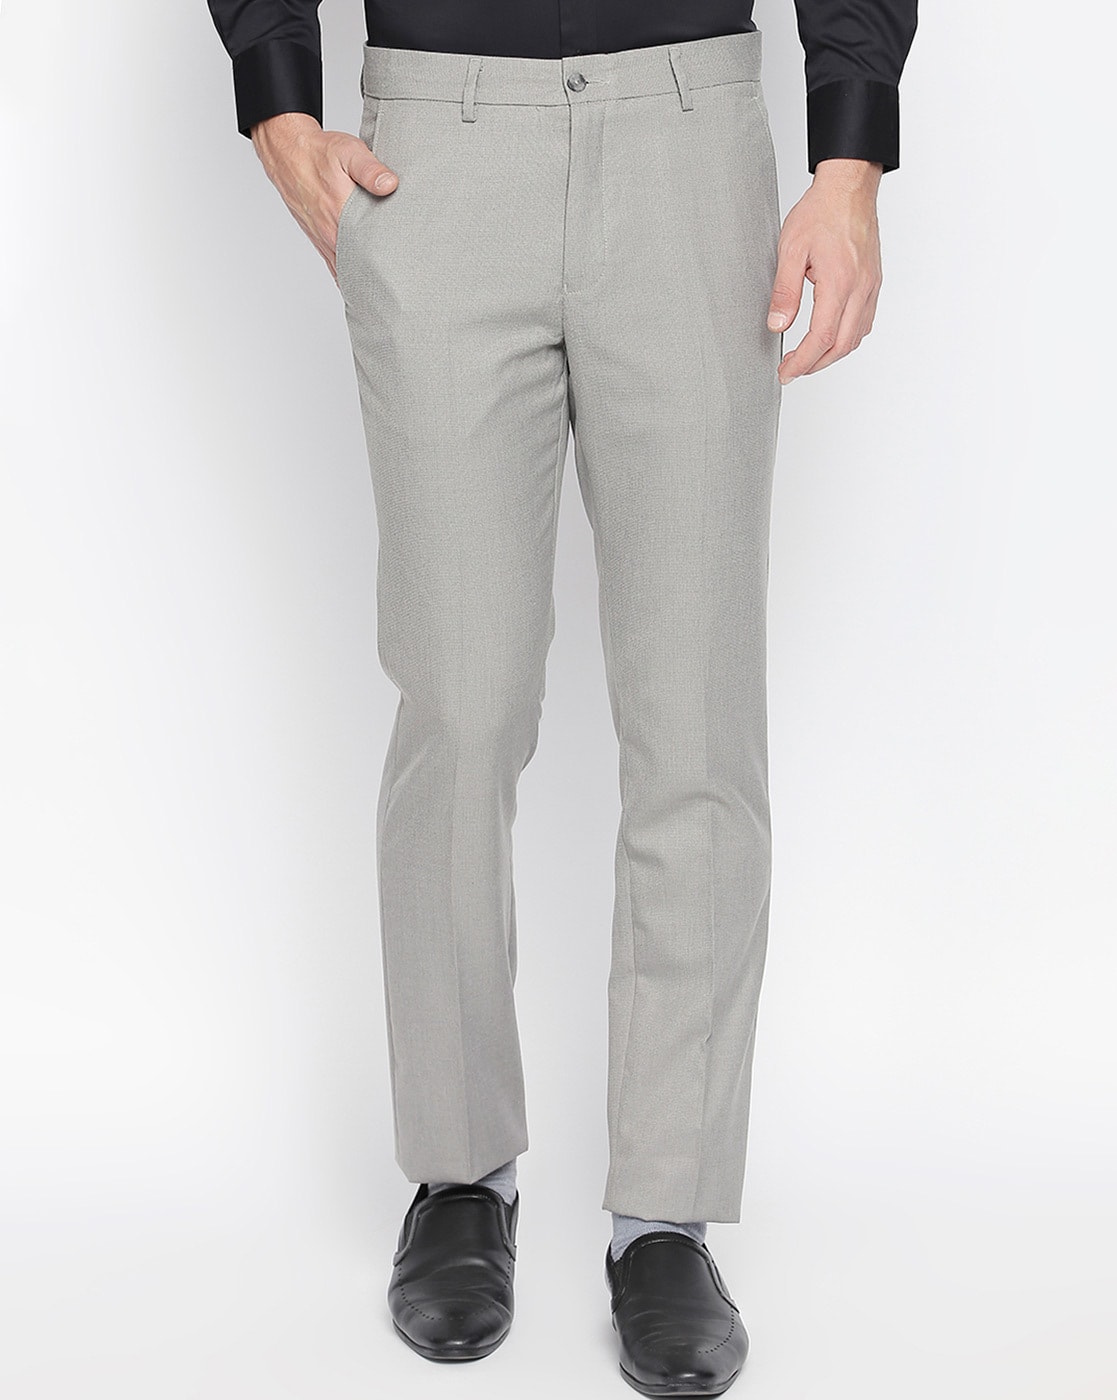 Pantaloons steps into mens formal wear with Peregrine by Pantaloons